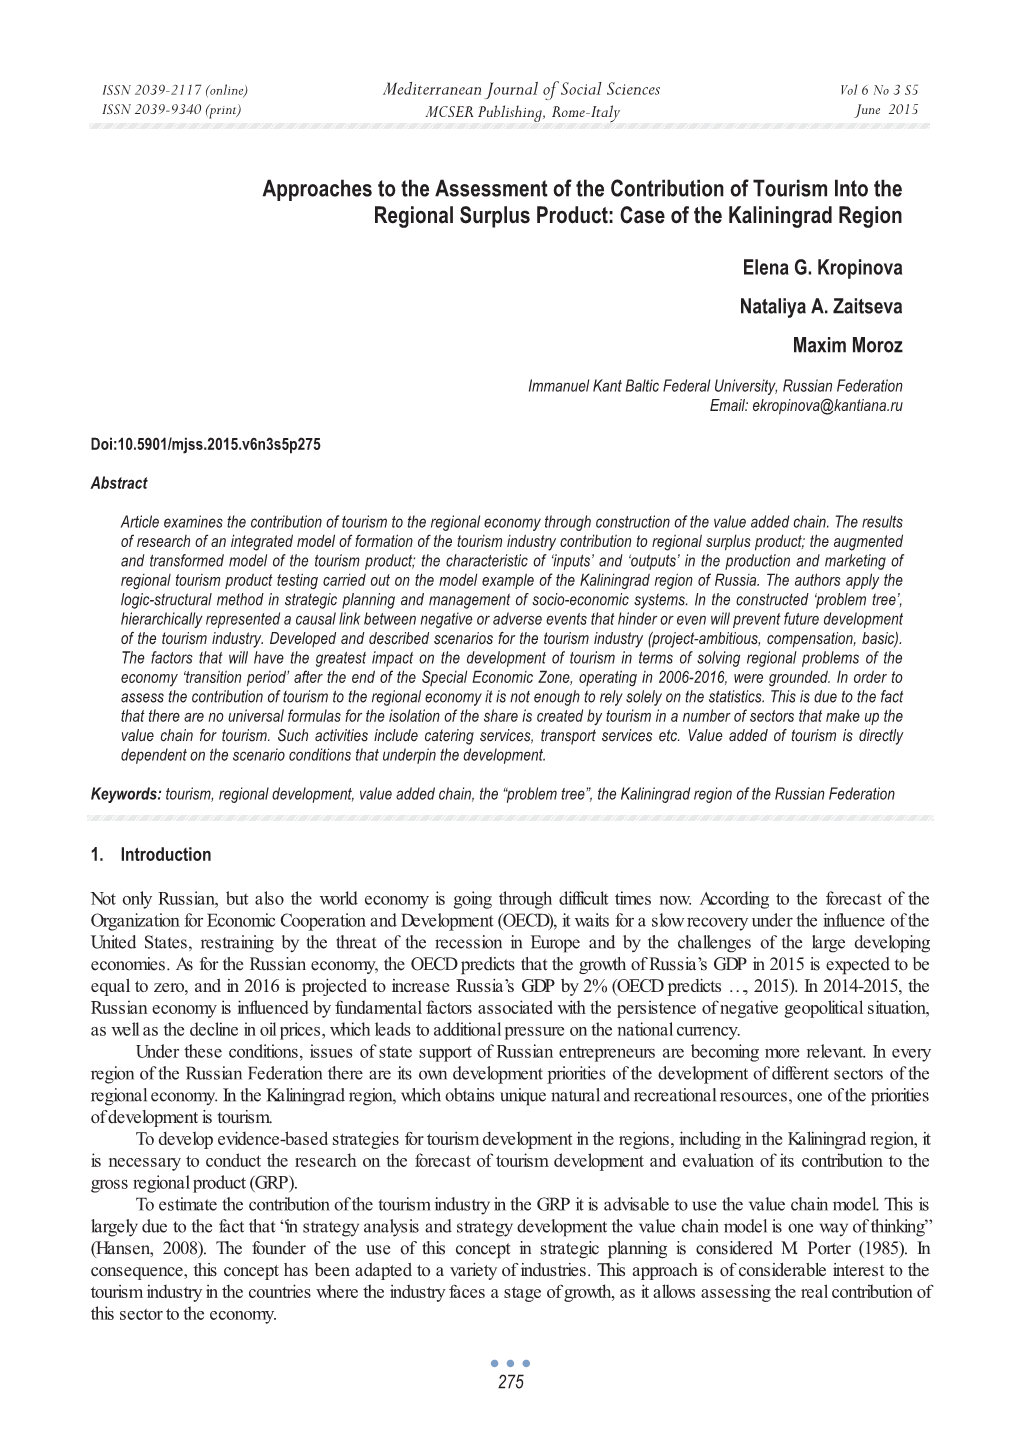 Approaches to the Assessment of the Contribution of Tourism Into the Regional Surplus Product: Case of the Kaliningrad Region